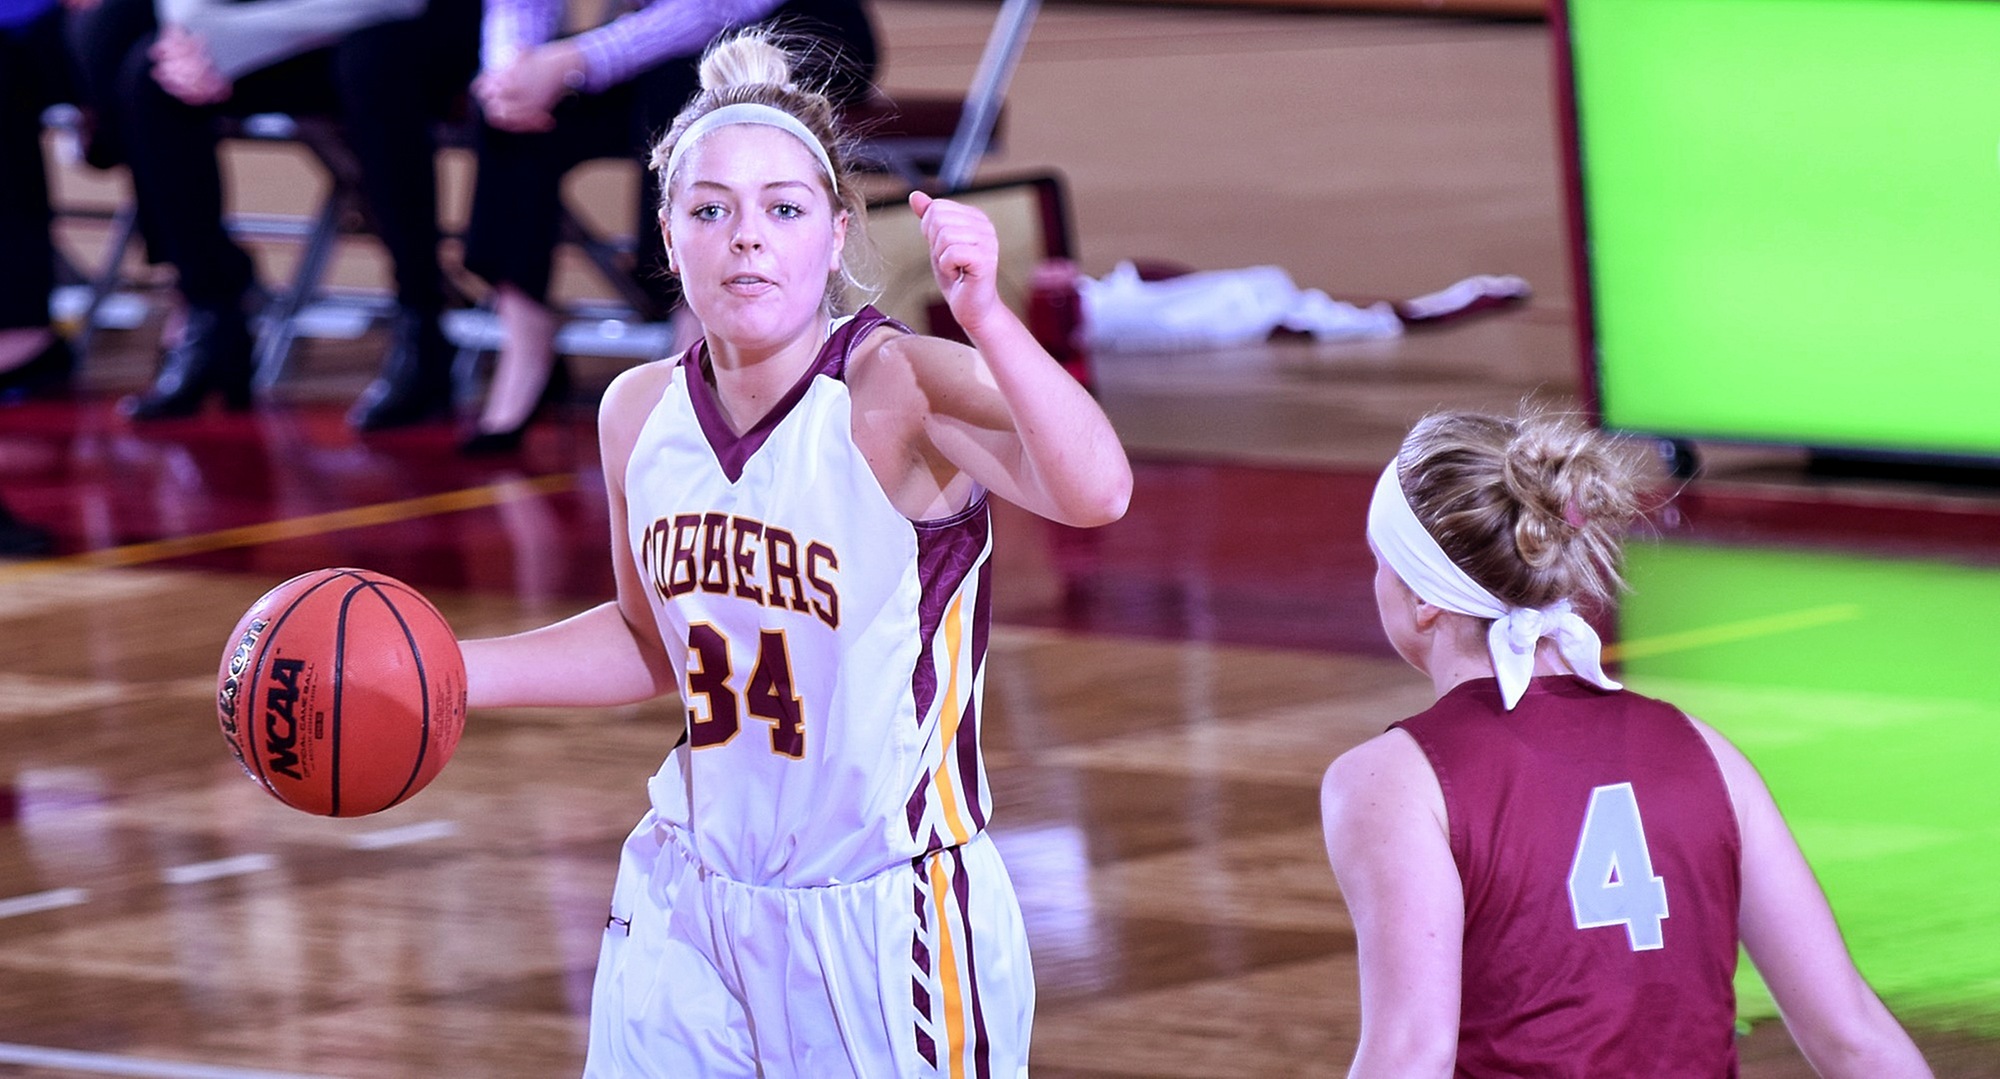 Senior Grace Wolhowe scored eight of her team-high 13 points in the second half to help Concordia beat Hamline 54-50.